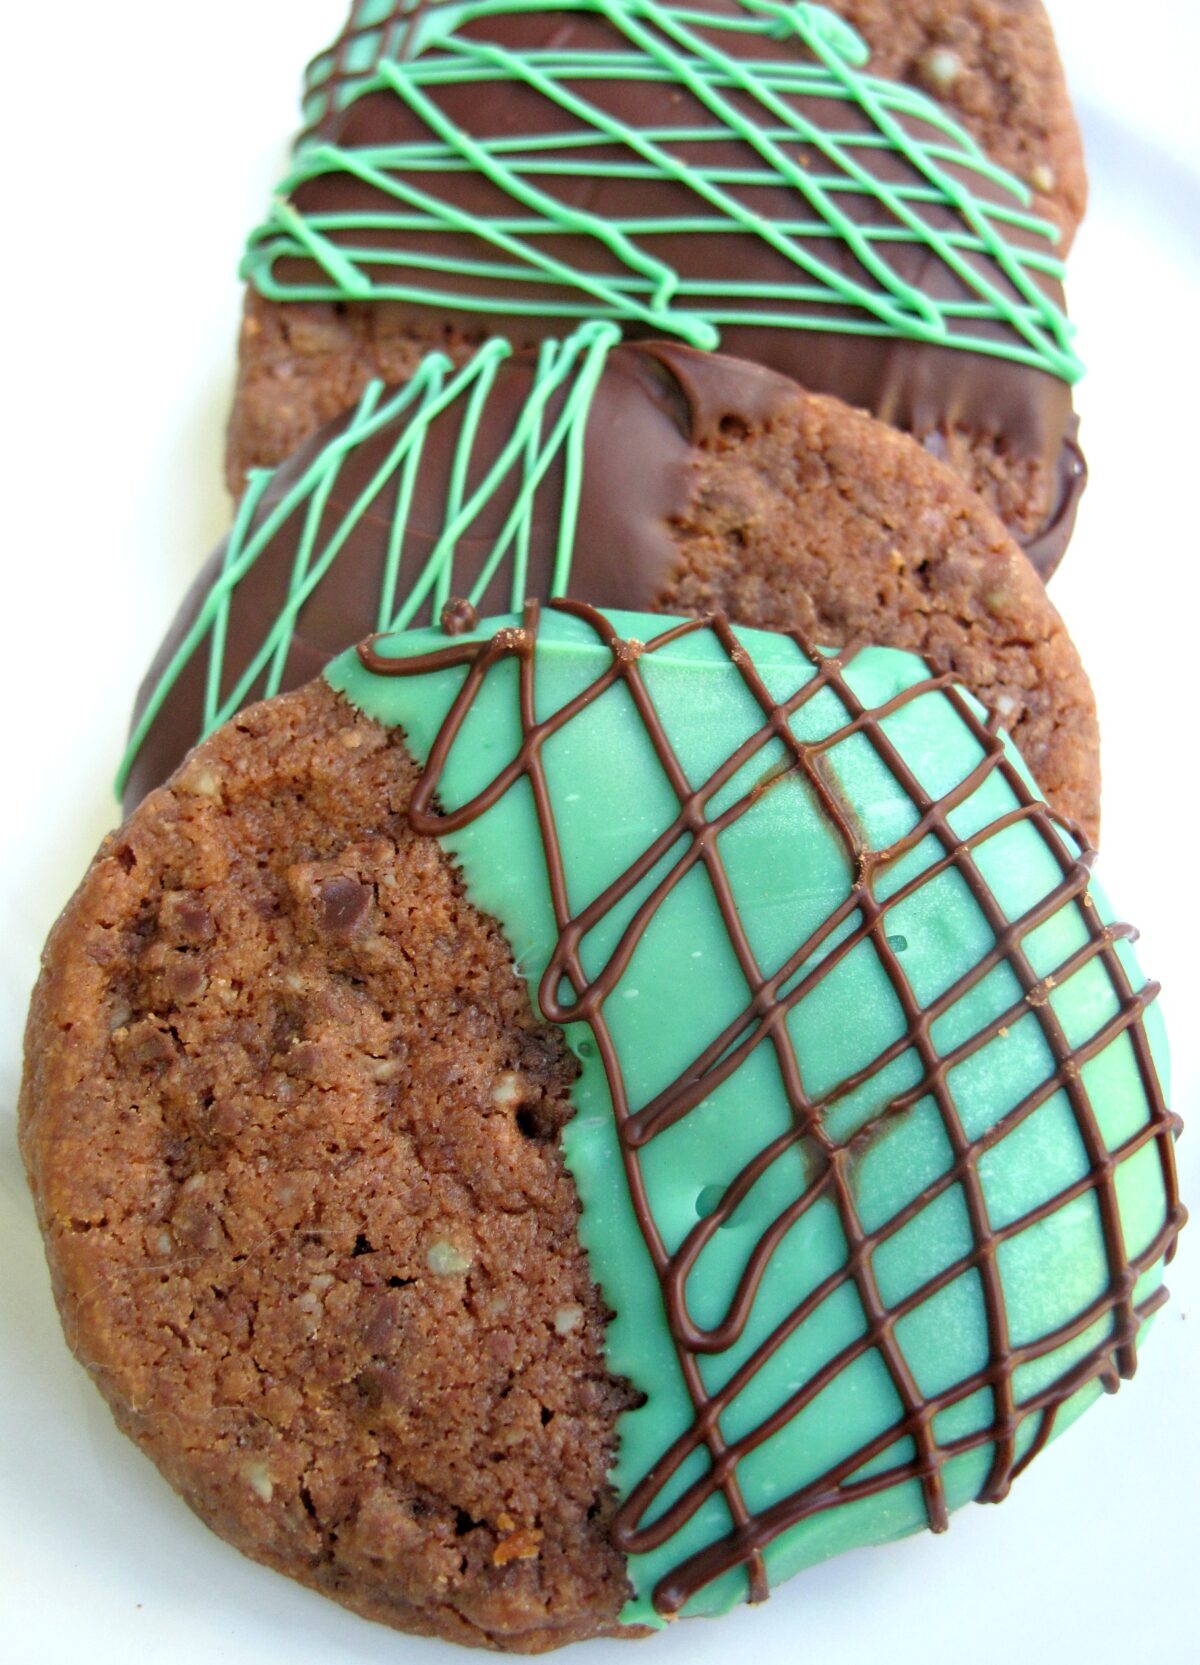 Closeup of a chocolate cookie dipped in melted green mint chips and drizzled with chocolate.